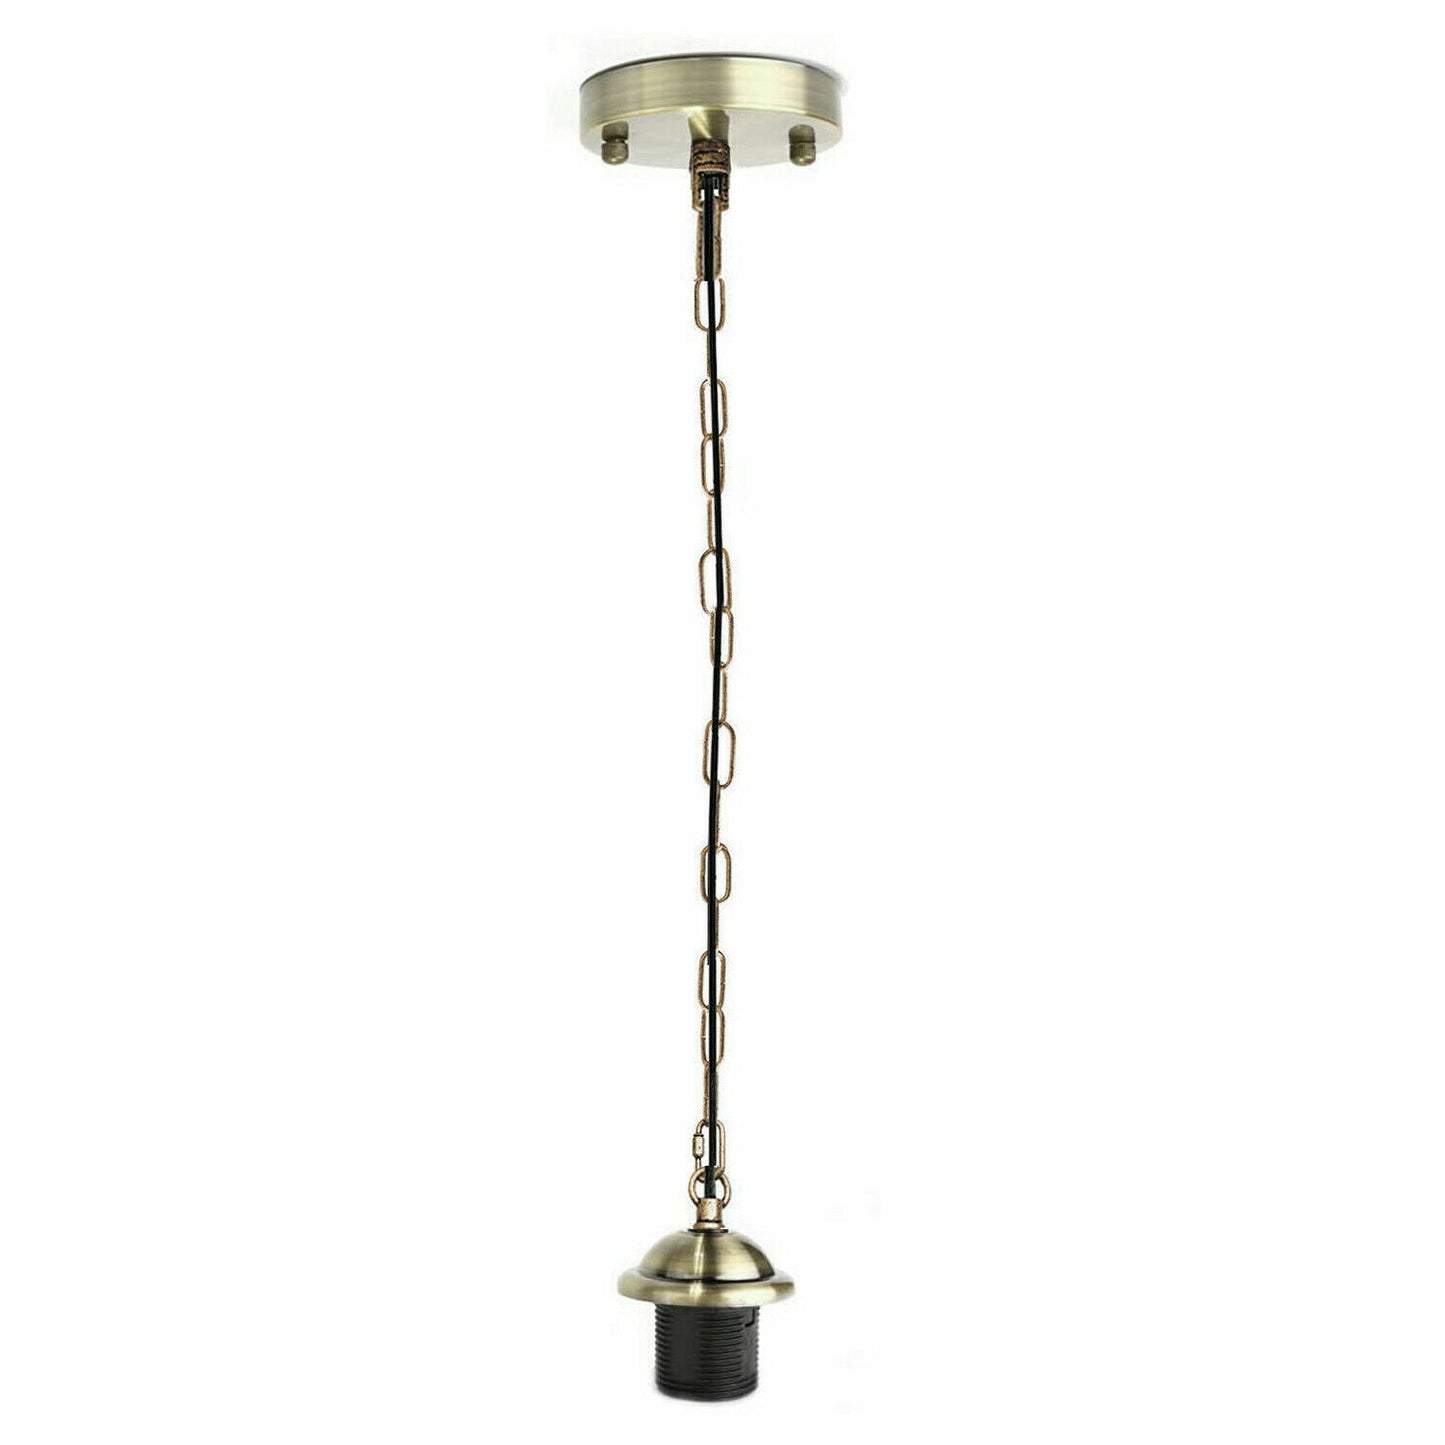 green Brass  Metal Ceiing E27 Lamp Holder Pendant Light With Chain